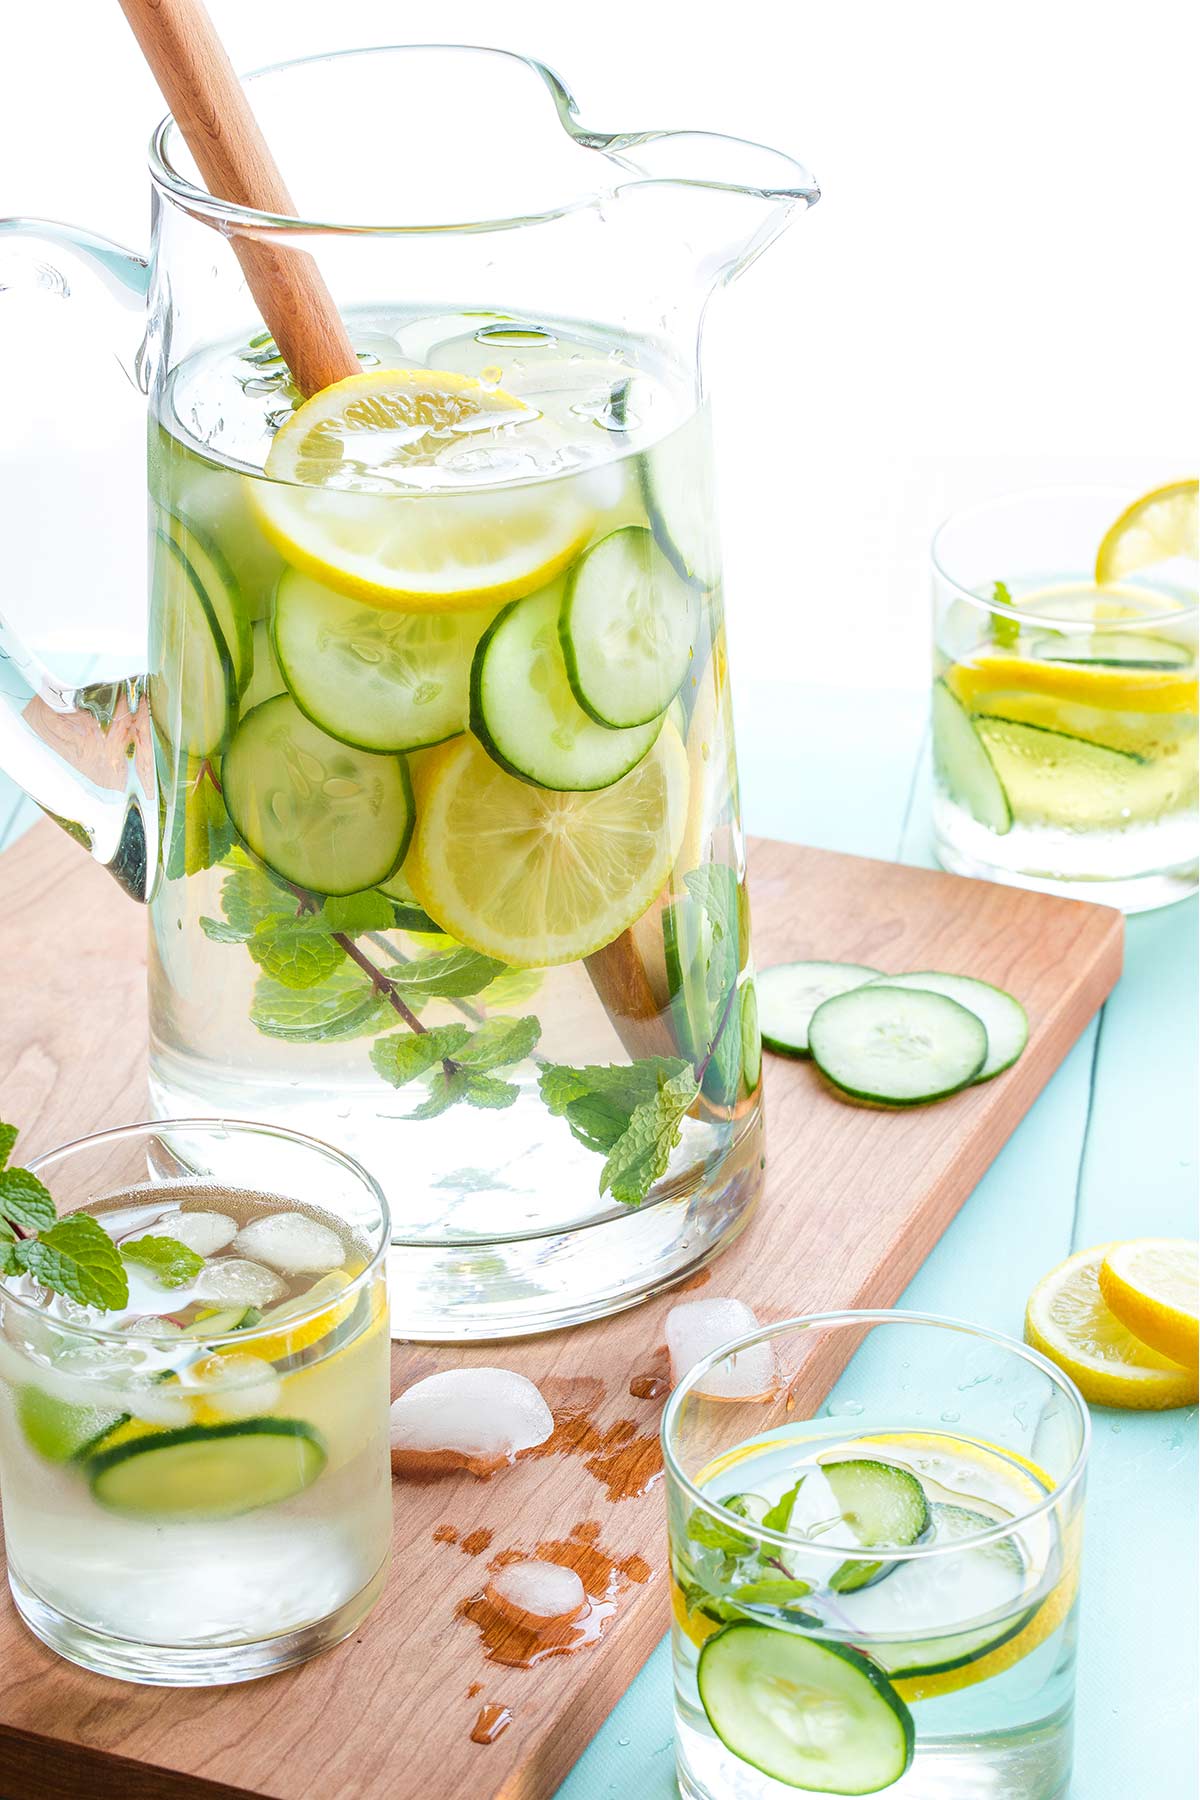 Pitcher surrounded by 3 glasses of water, with melting ice and extra cucumber and lemon slices scattered around.